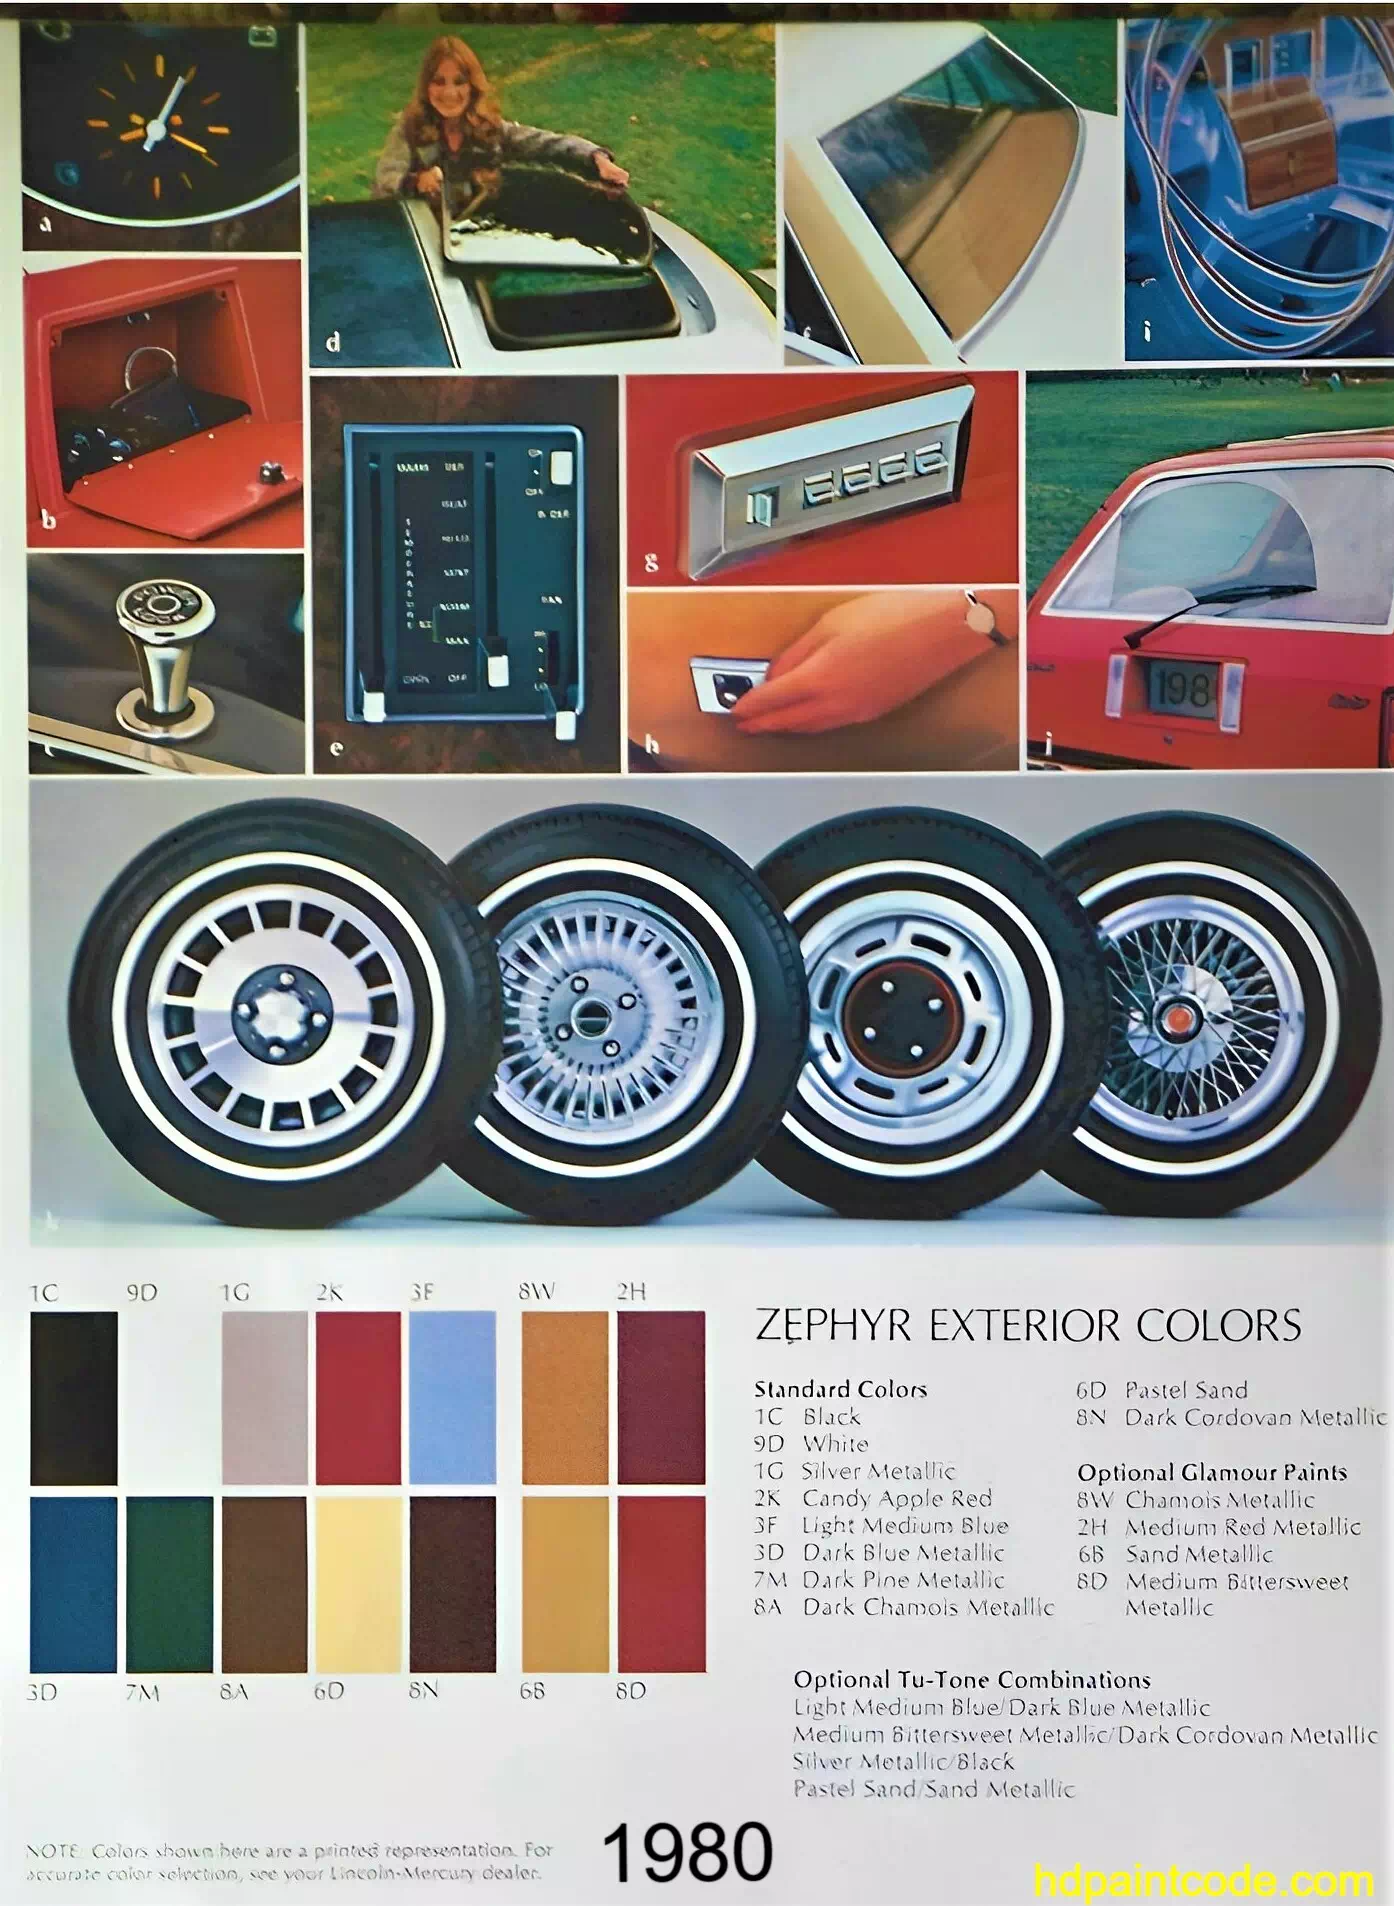 A photo showing the exterior paint codes, colors and tire rim design on the 1980 Mercury Zephyr automobile 